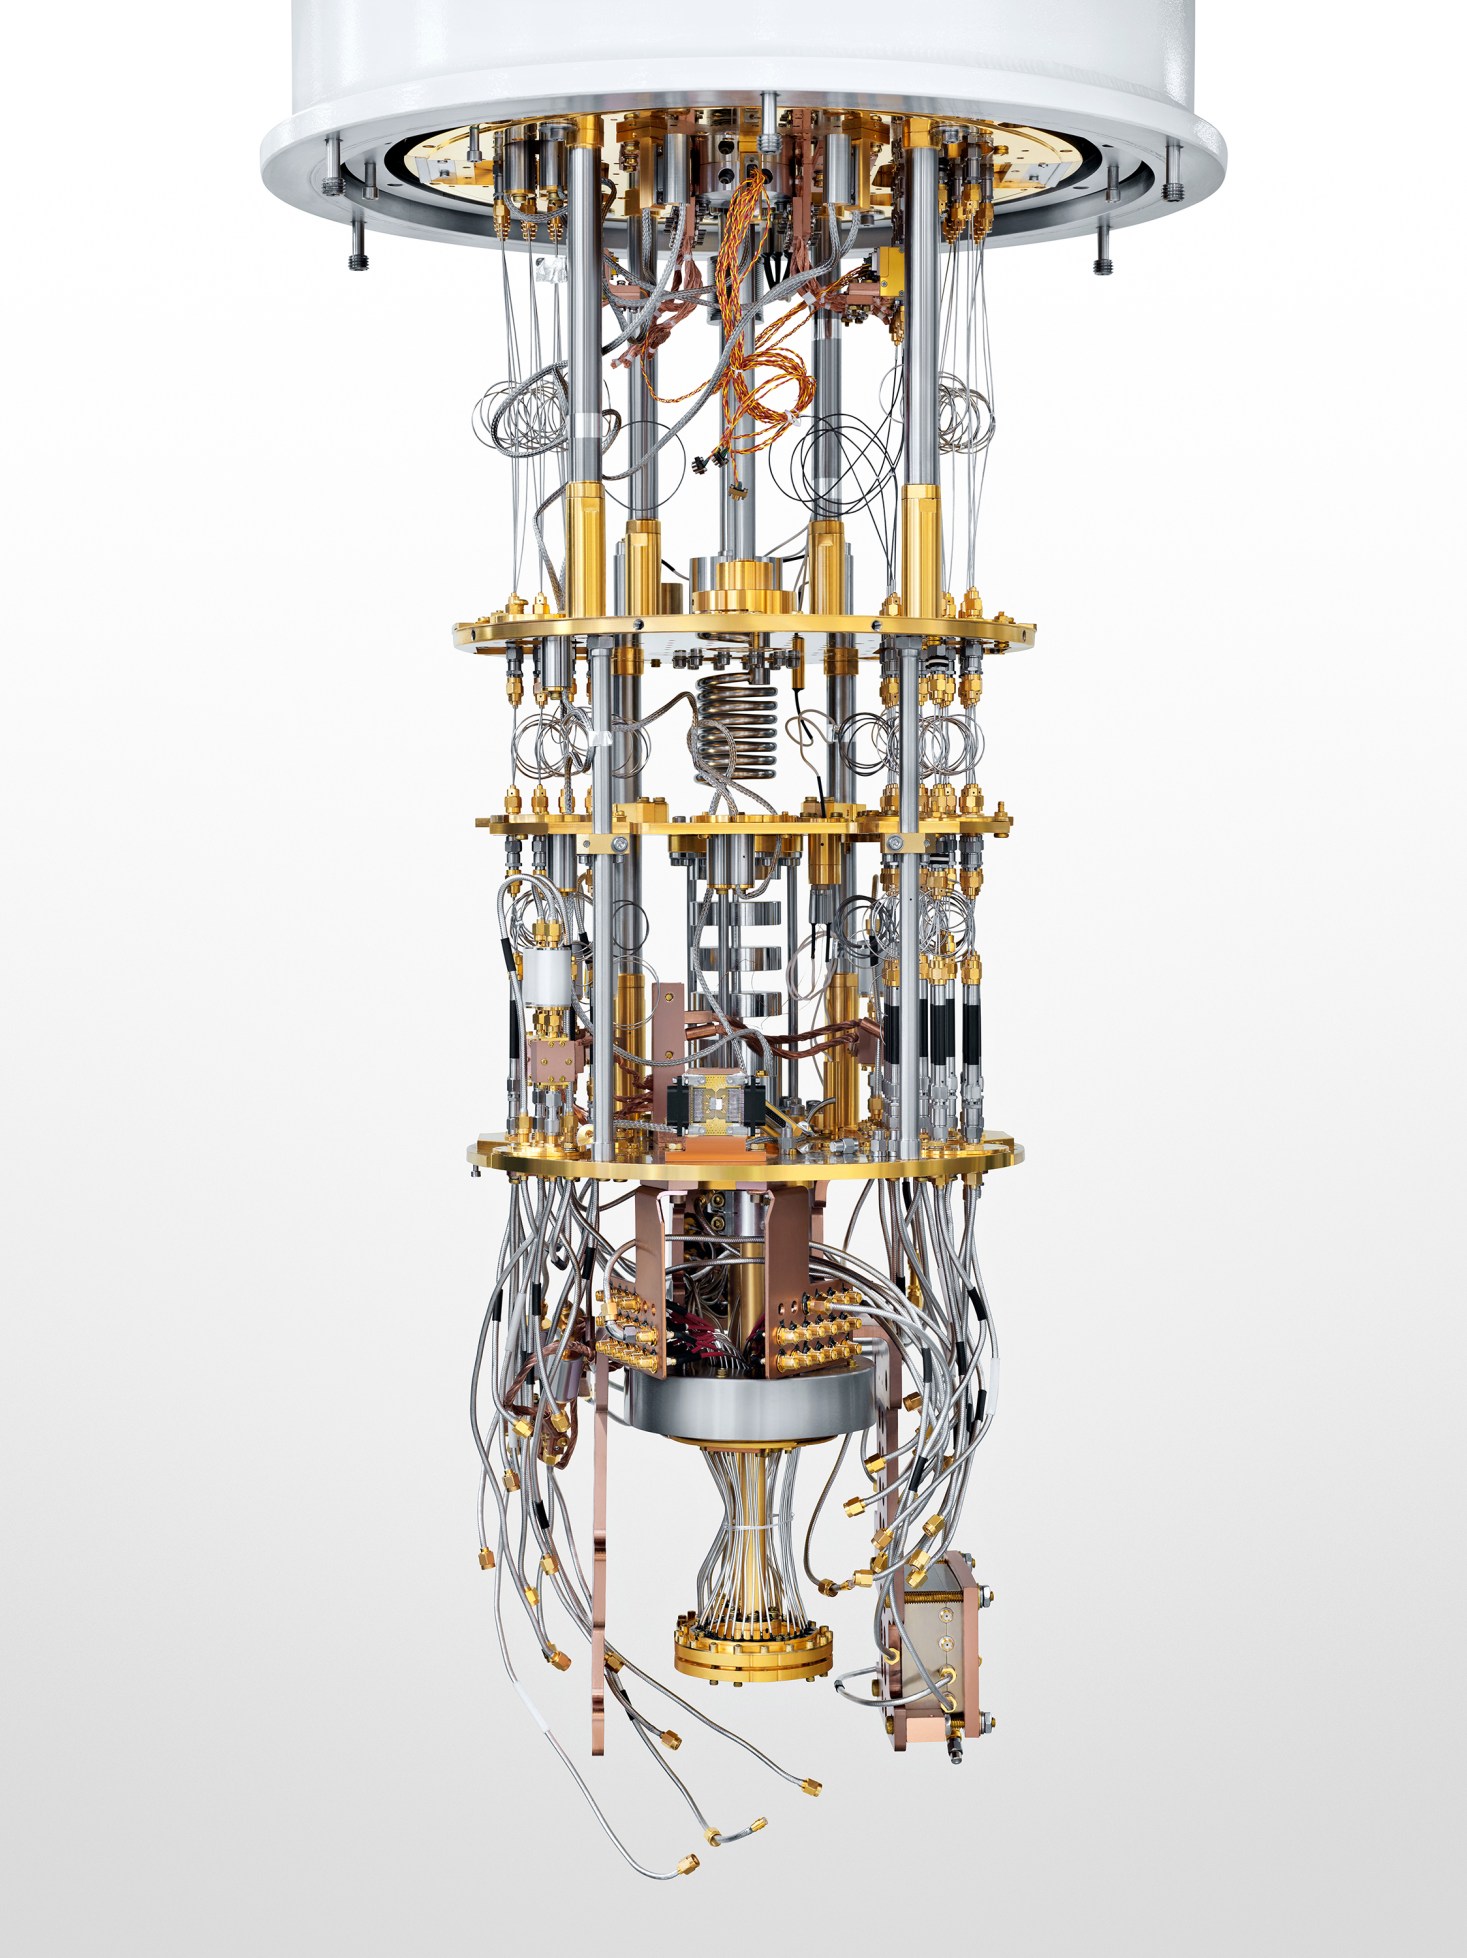 Inside the race to build the best quantum computer on Earth